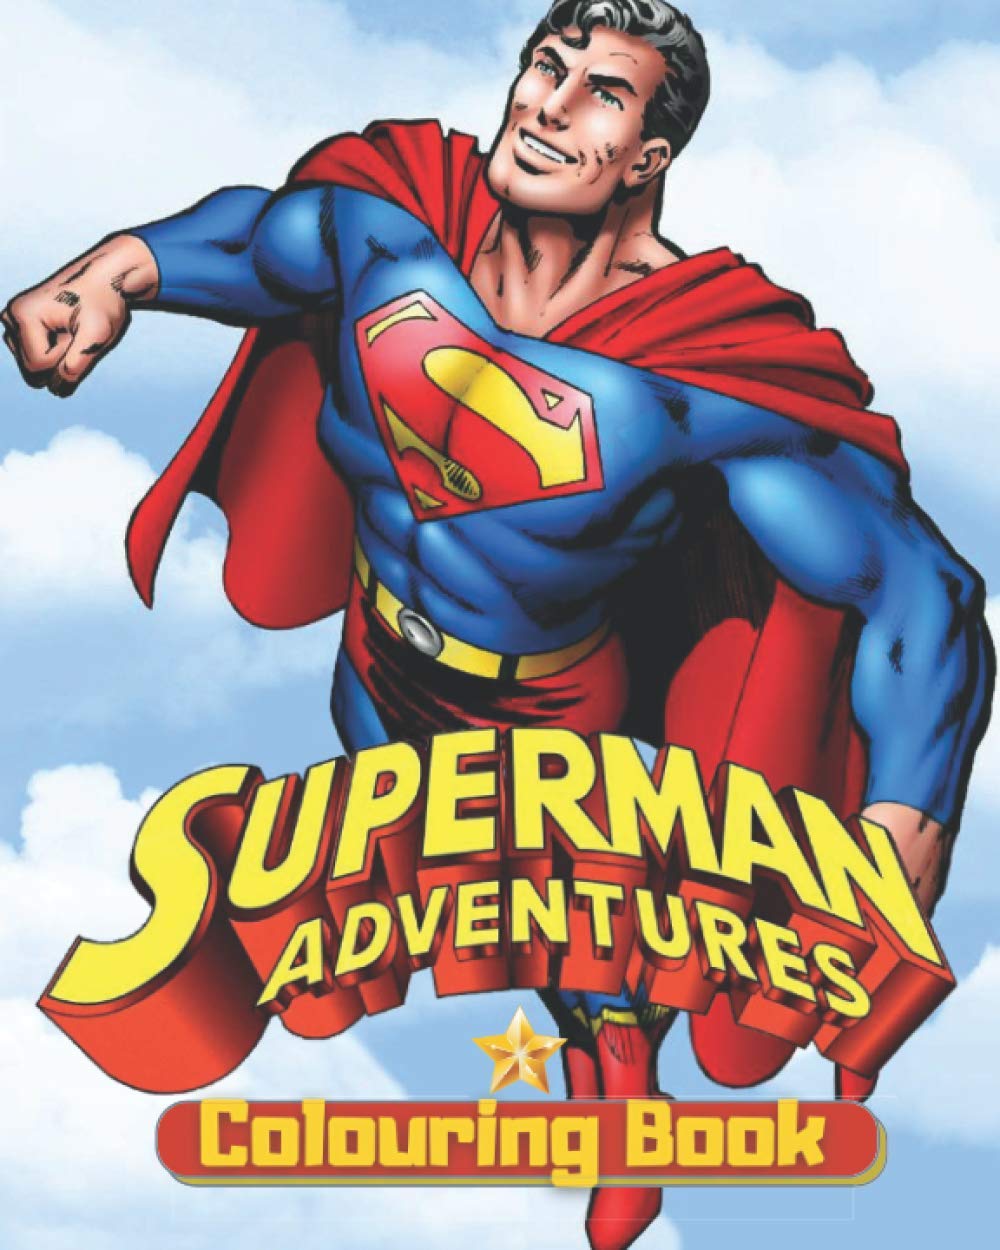 Superman colouring book high quality coloring pages for kids and adults the amazing superman coloring book customize your favorite superman characters amazing drawings by mz colouring books